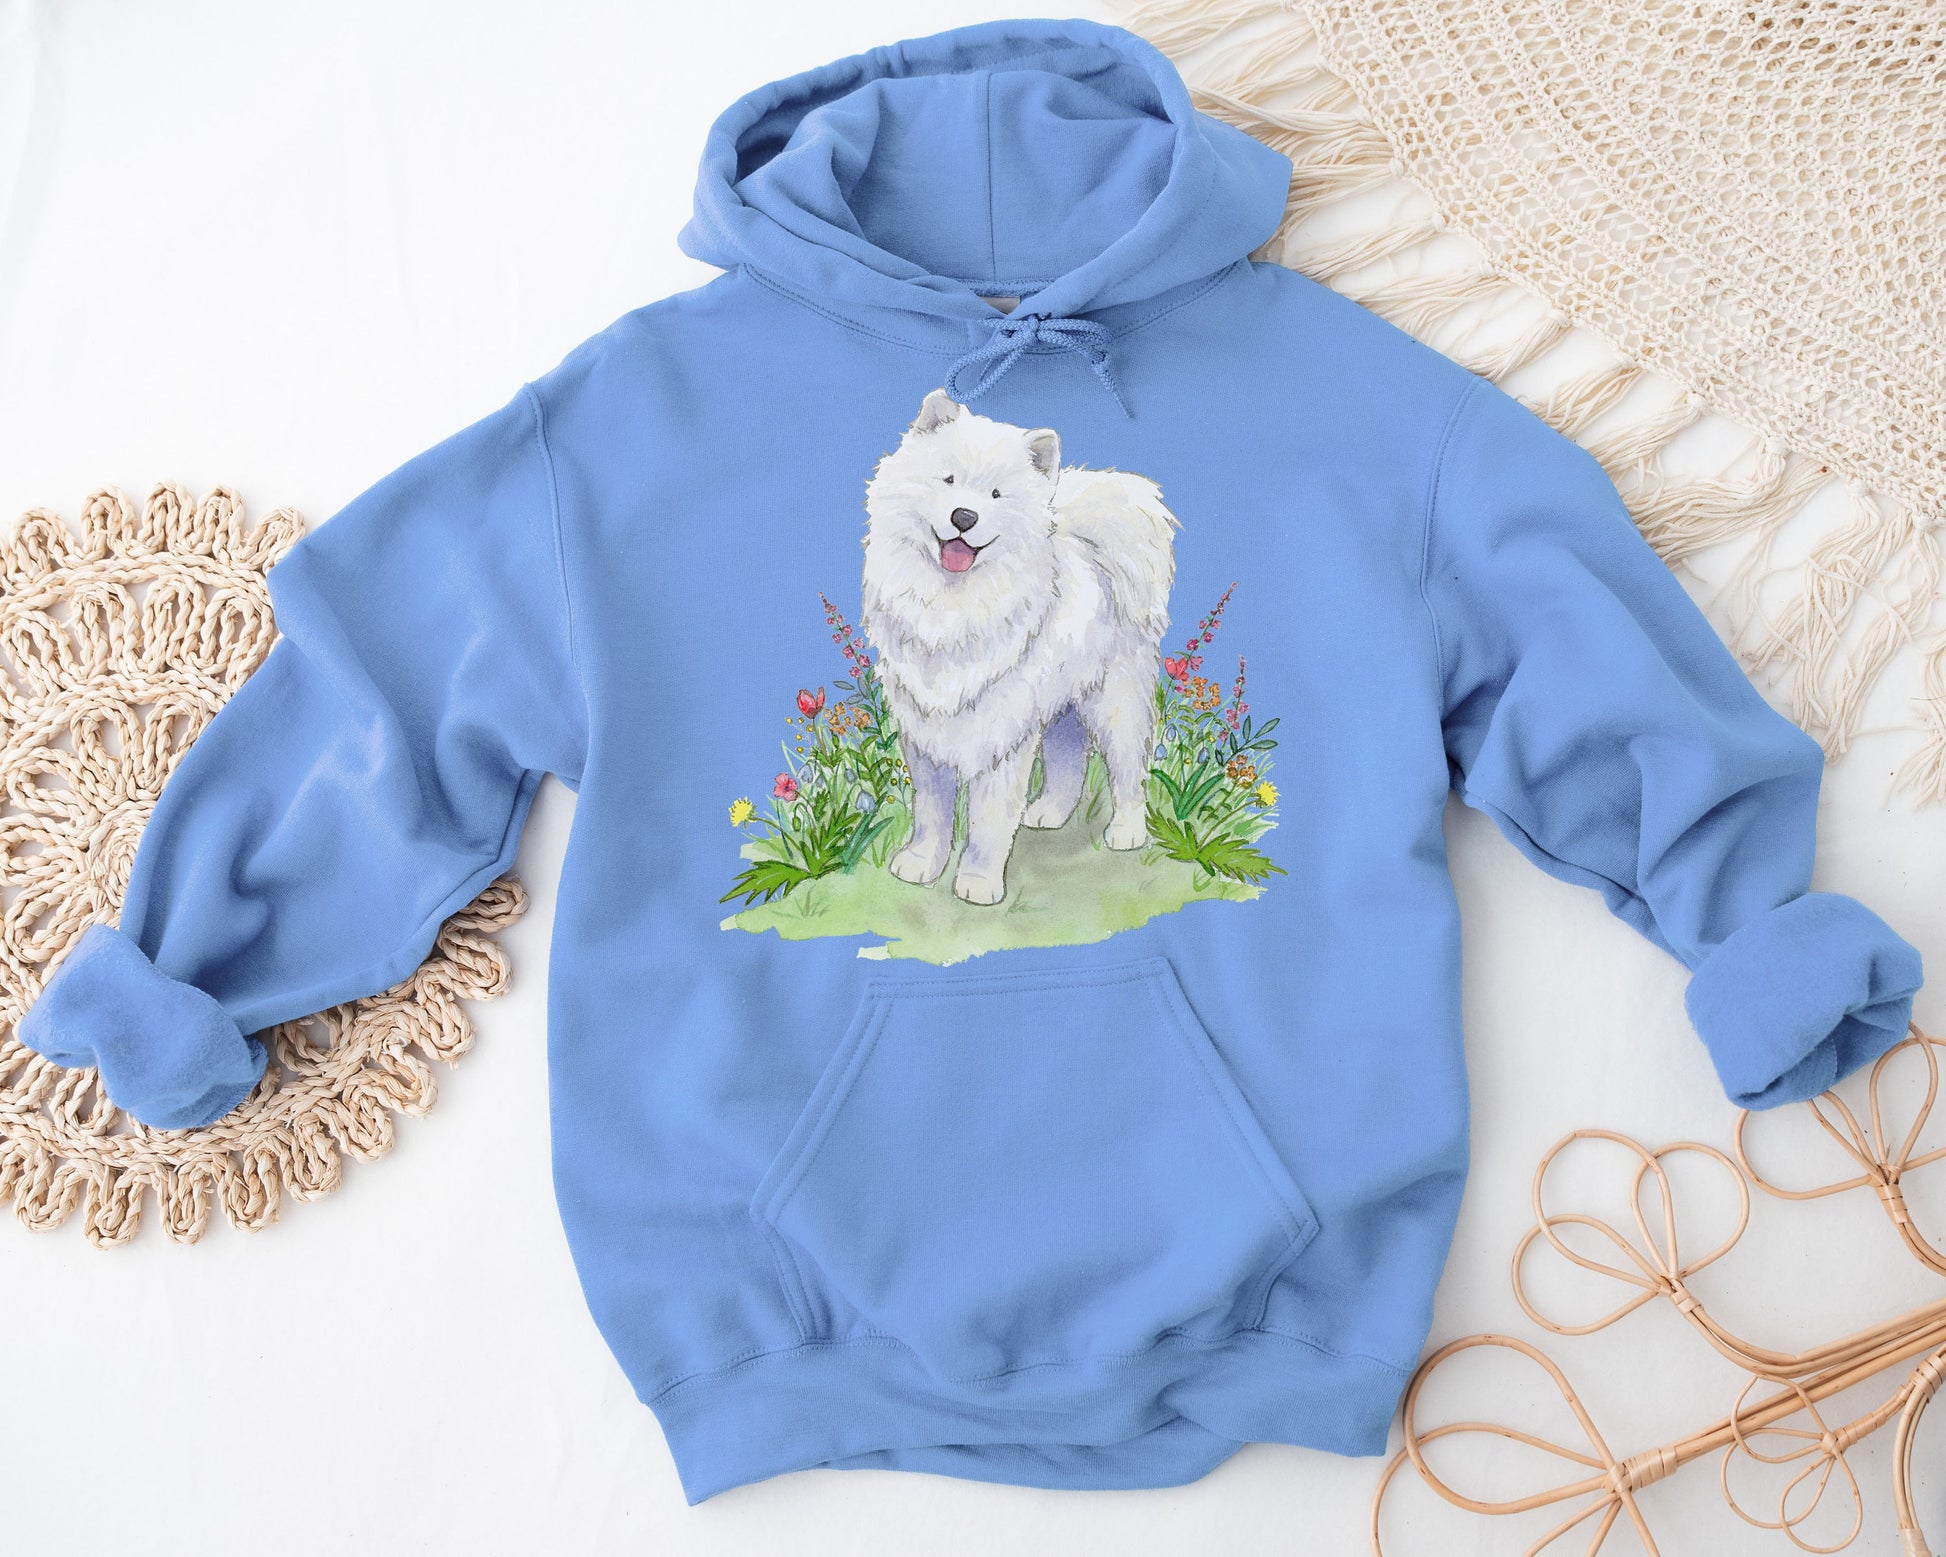 Blue hooded sweatshirt with cute artwork of samoyed dog and wildflowers